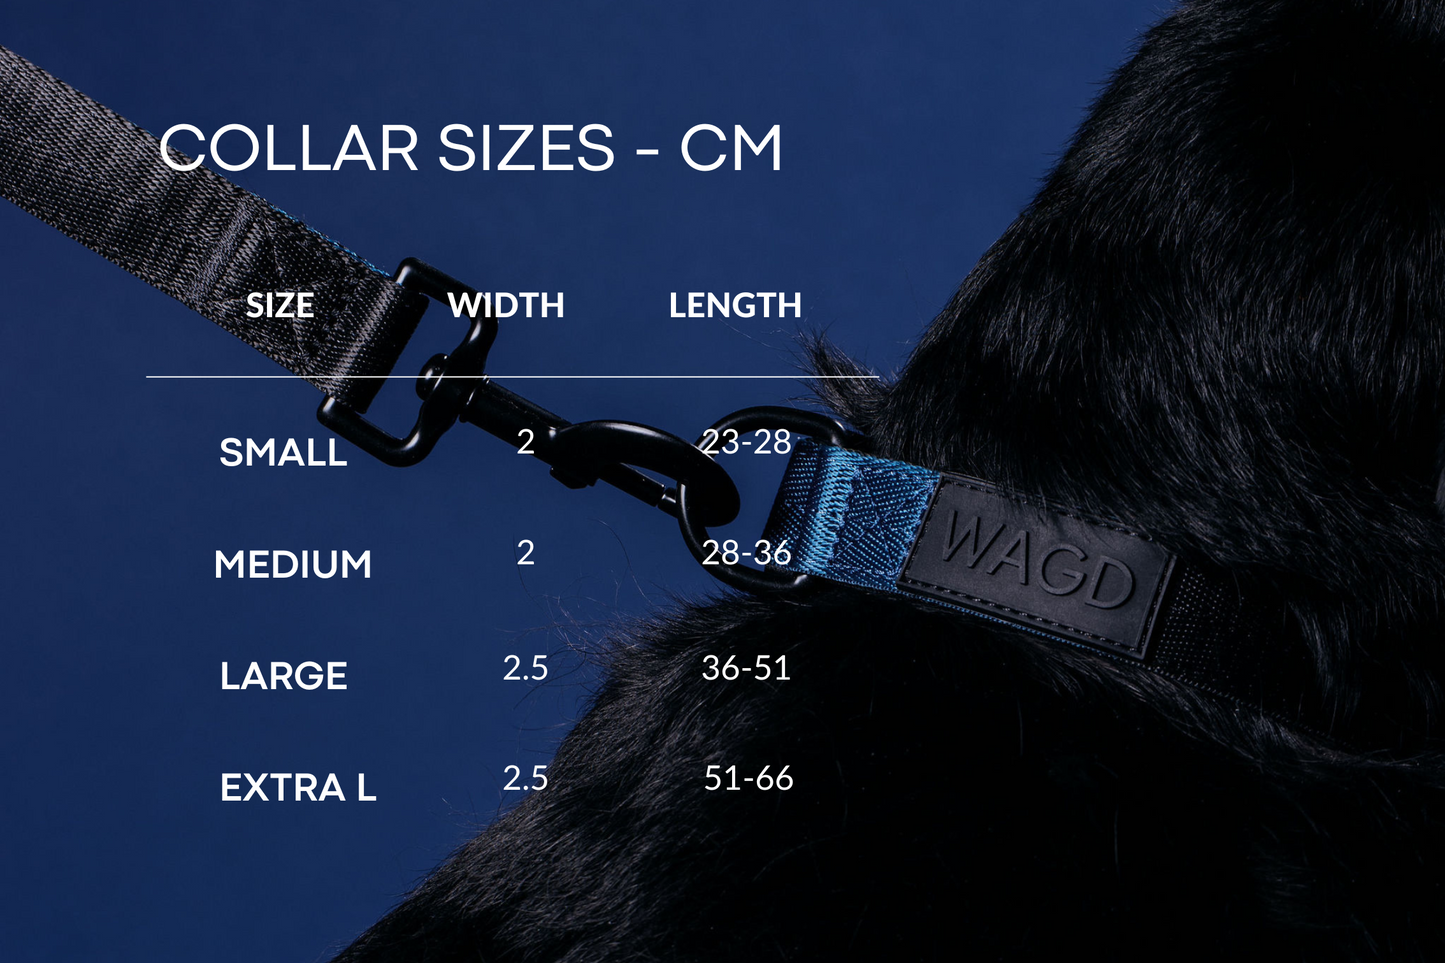 Collar sizing chart, small 25 to 28cm, medium 28 to 36cm, large 36 to 51cm and Extra L 51 to 66cm. Background shows a black dogs neck with a collar on.